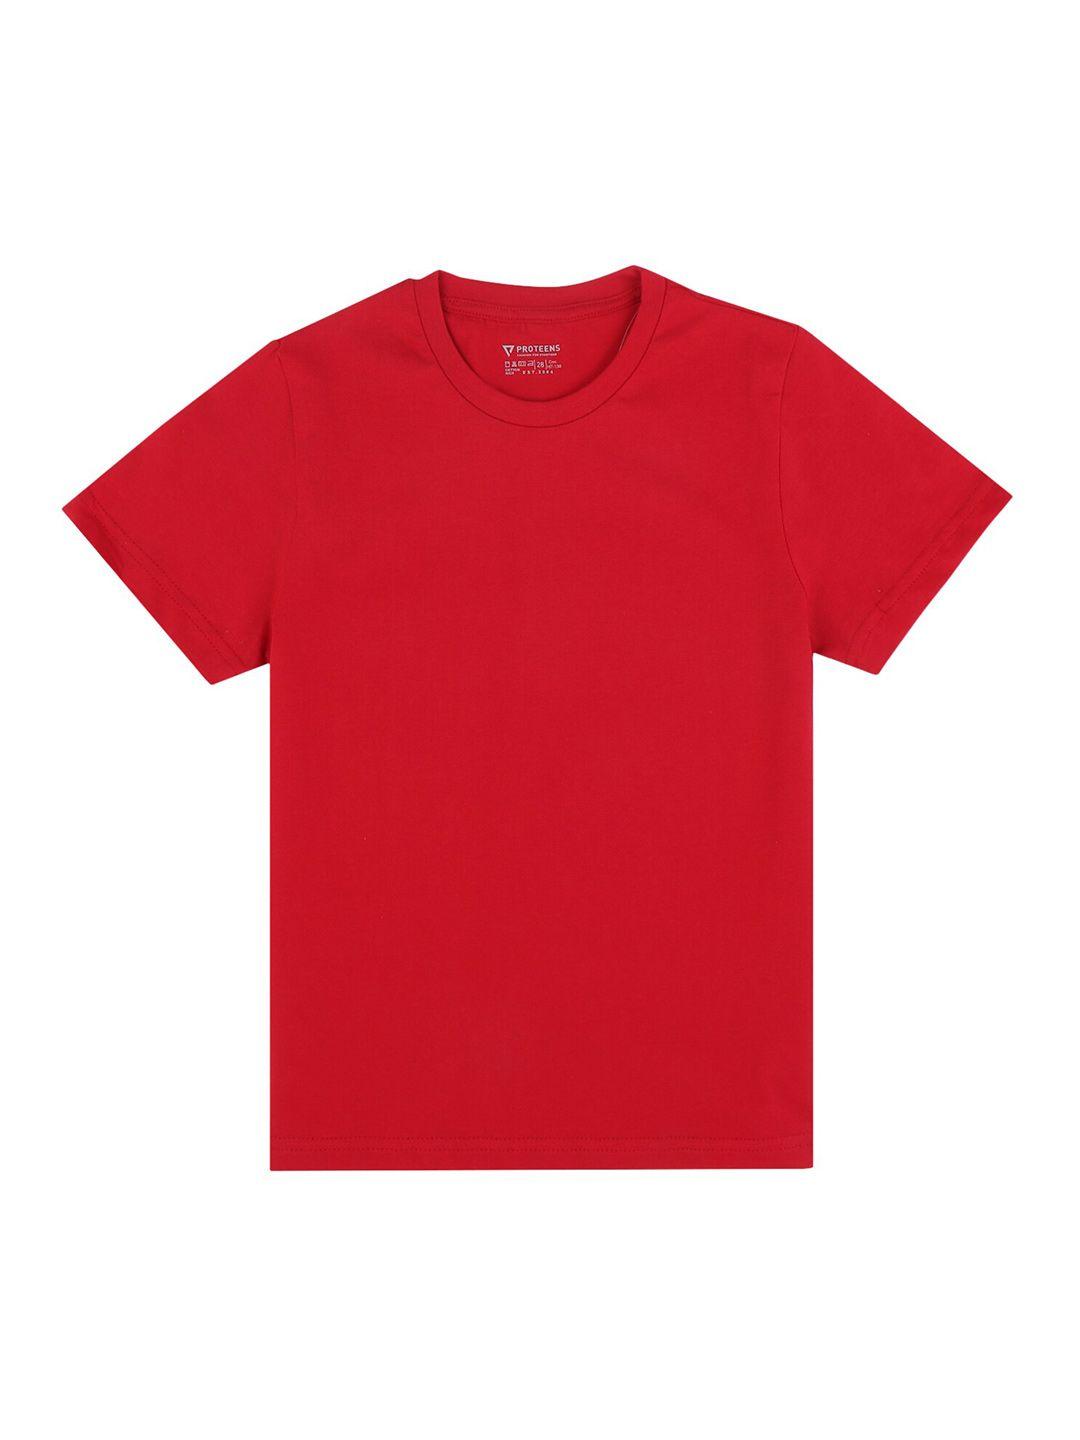 proteens boys red t-shirt